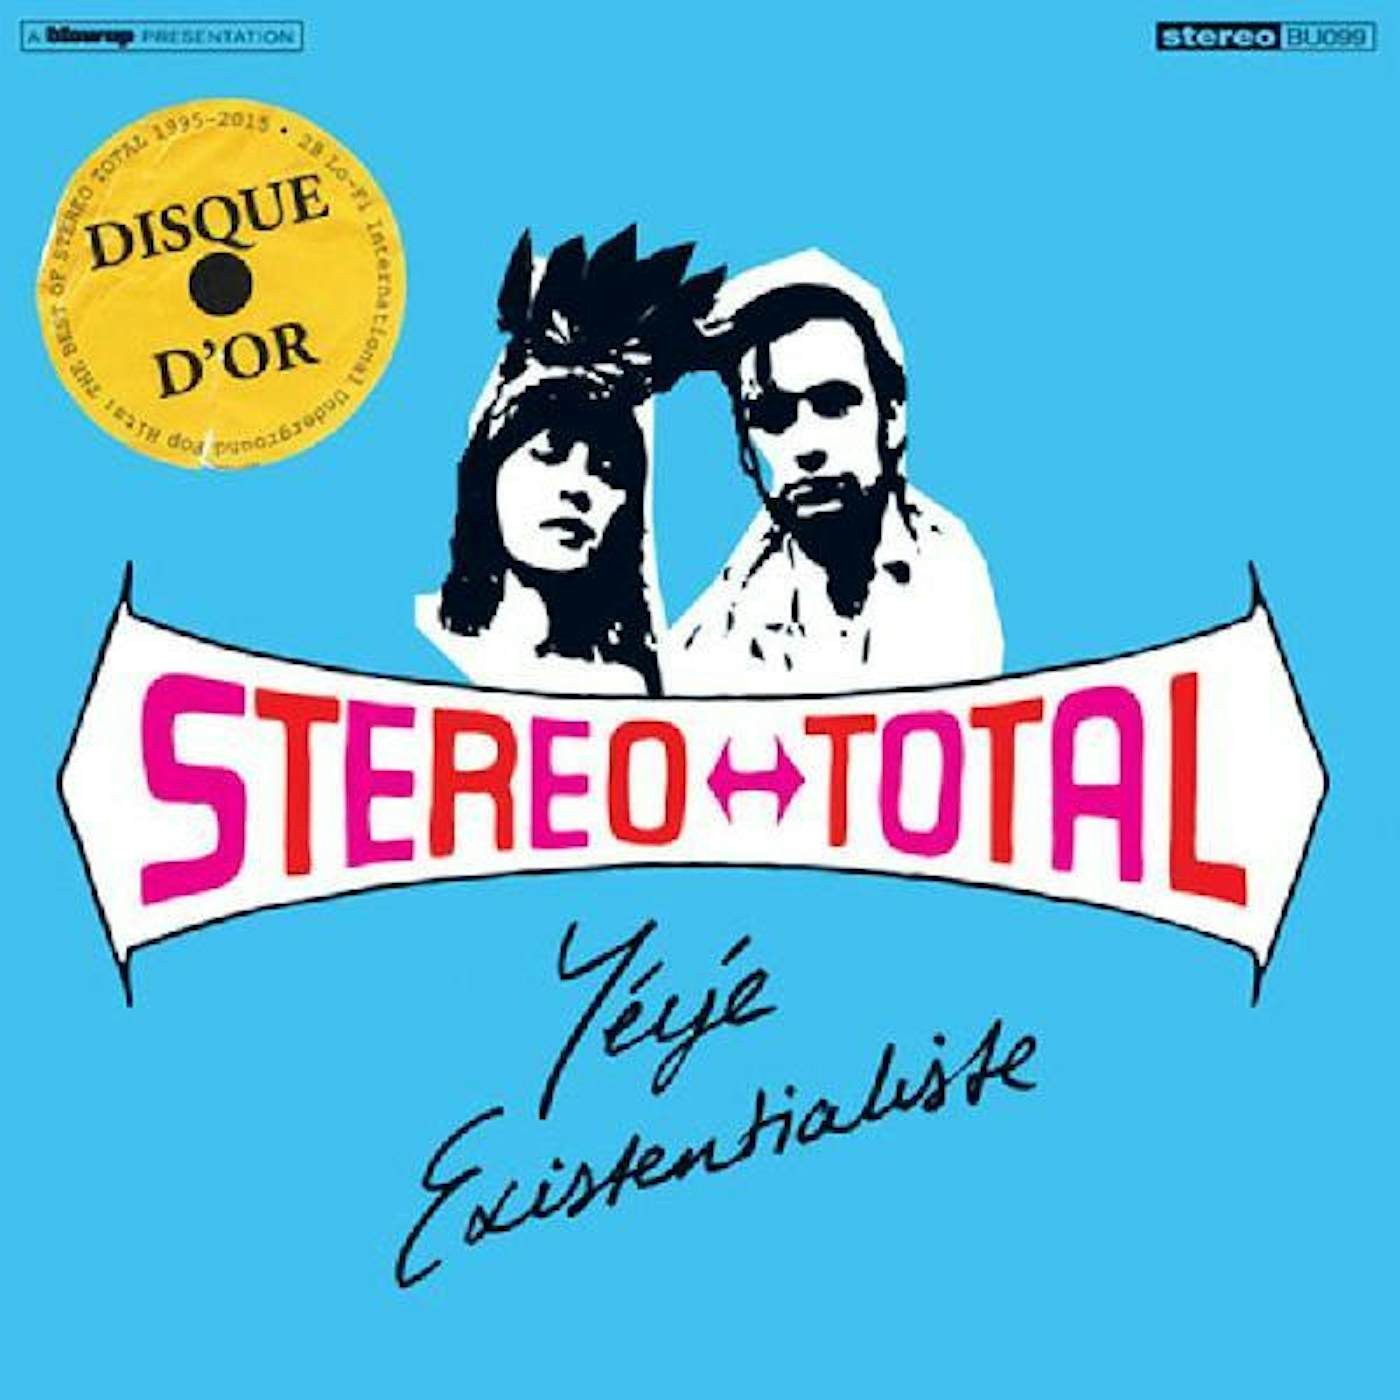 Stereo Total Yeye Existentialiste Vinyl Record